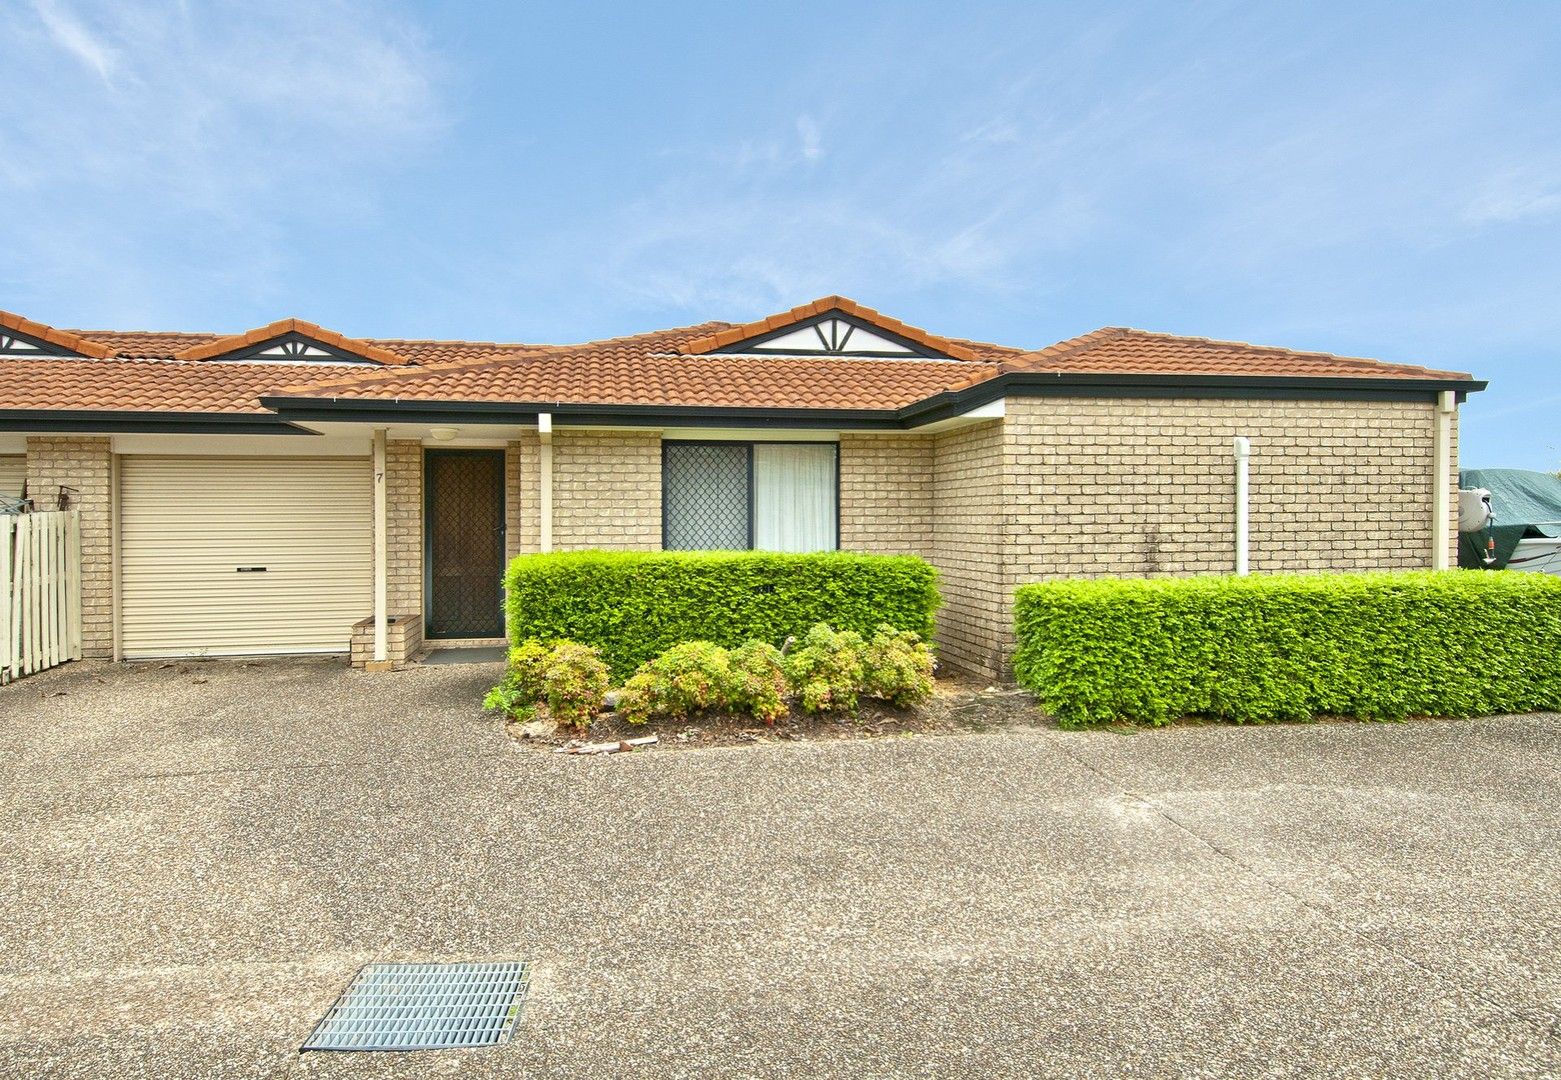 2 bedrooms Apartment / Unit / Flat in 7/31 Solar Street BEENLEIGH QLD, 4207